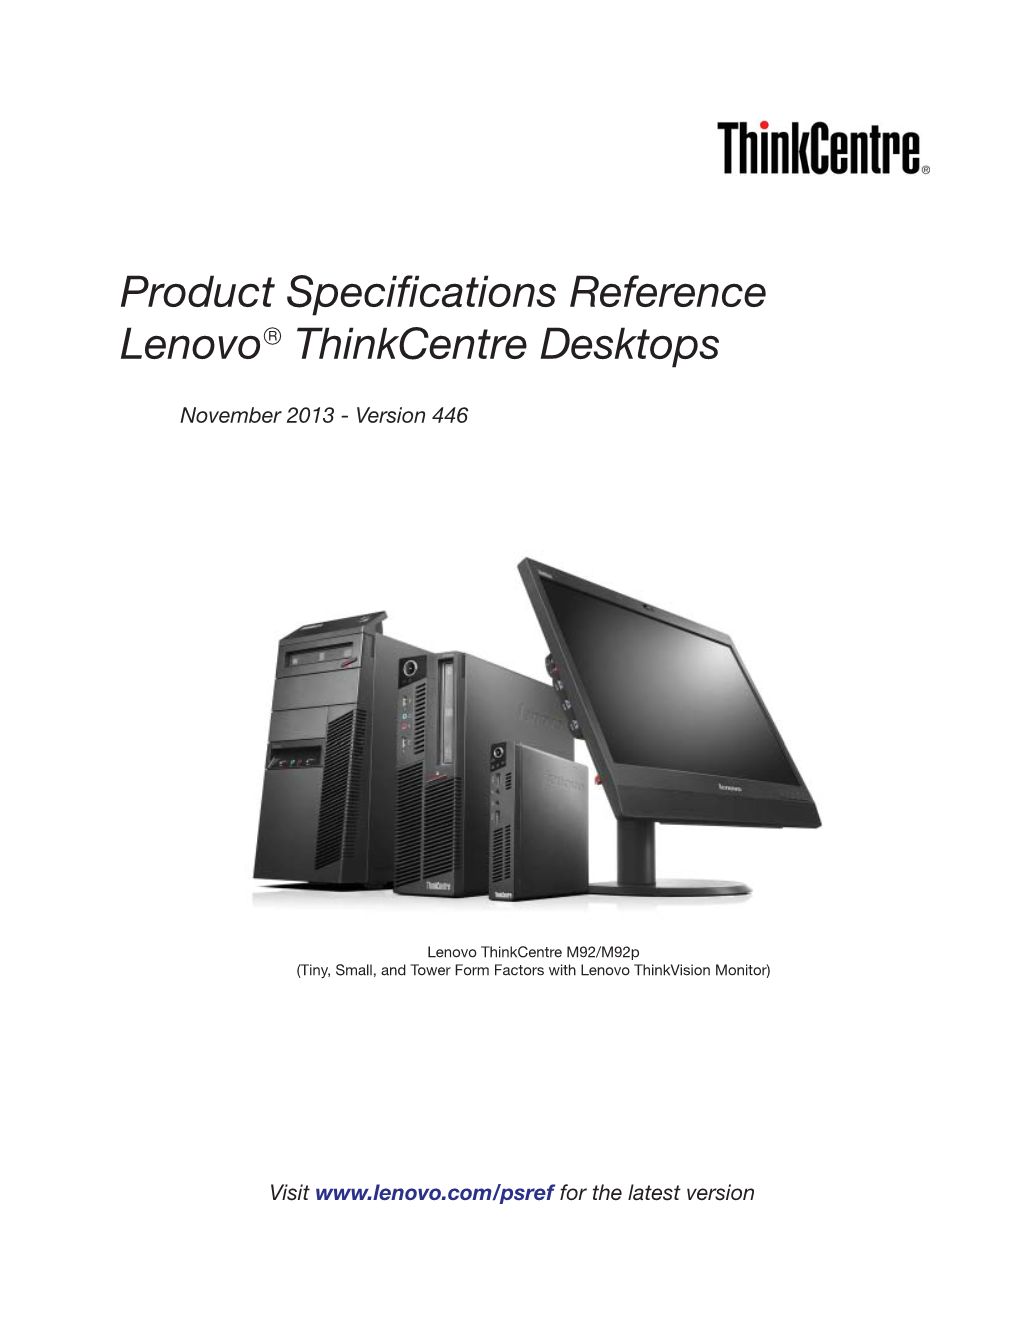 Product Specifications Reference Lenovo Thinkcentre Desktops